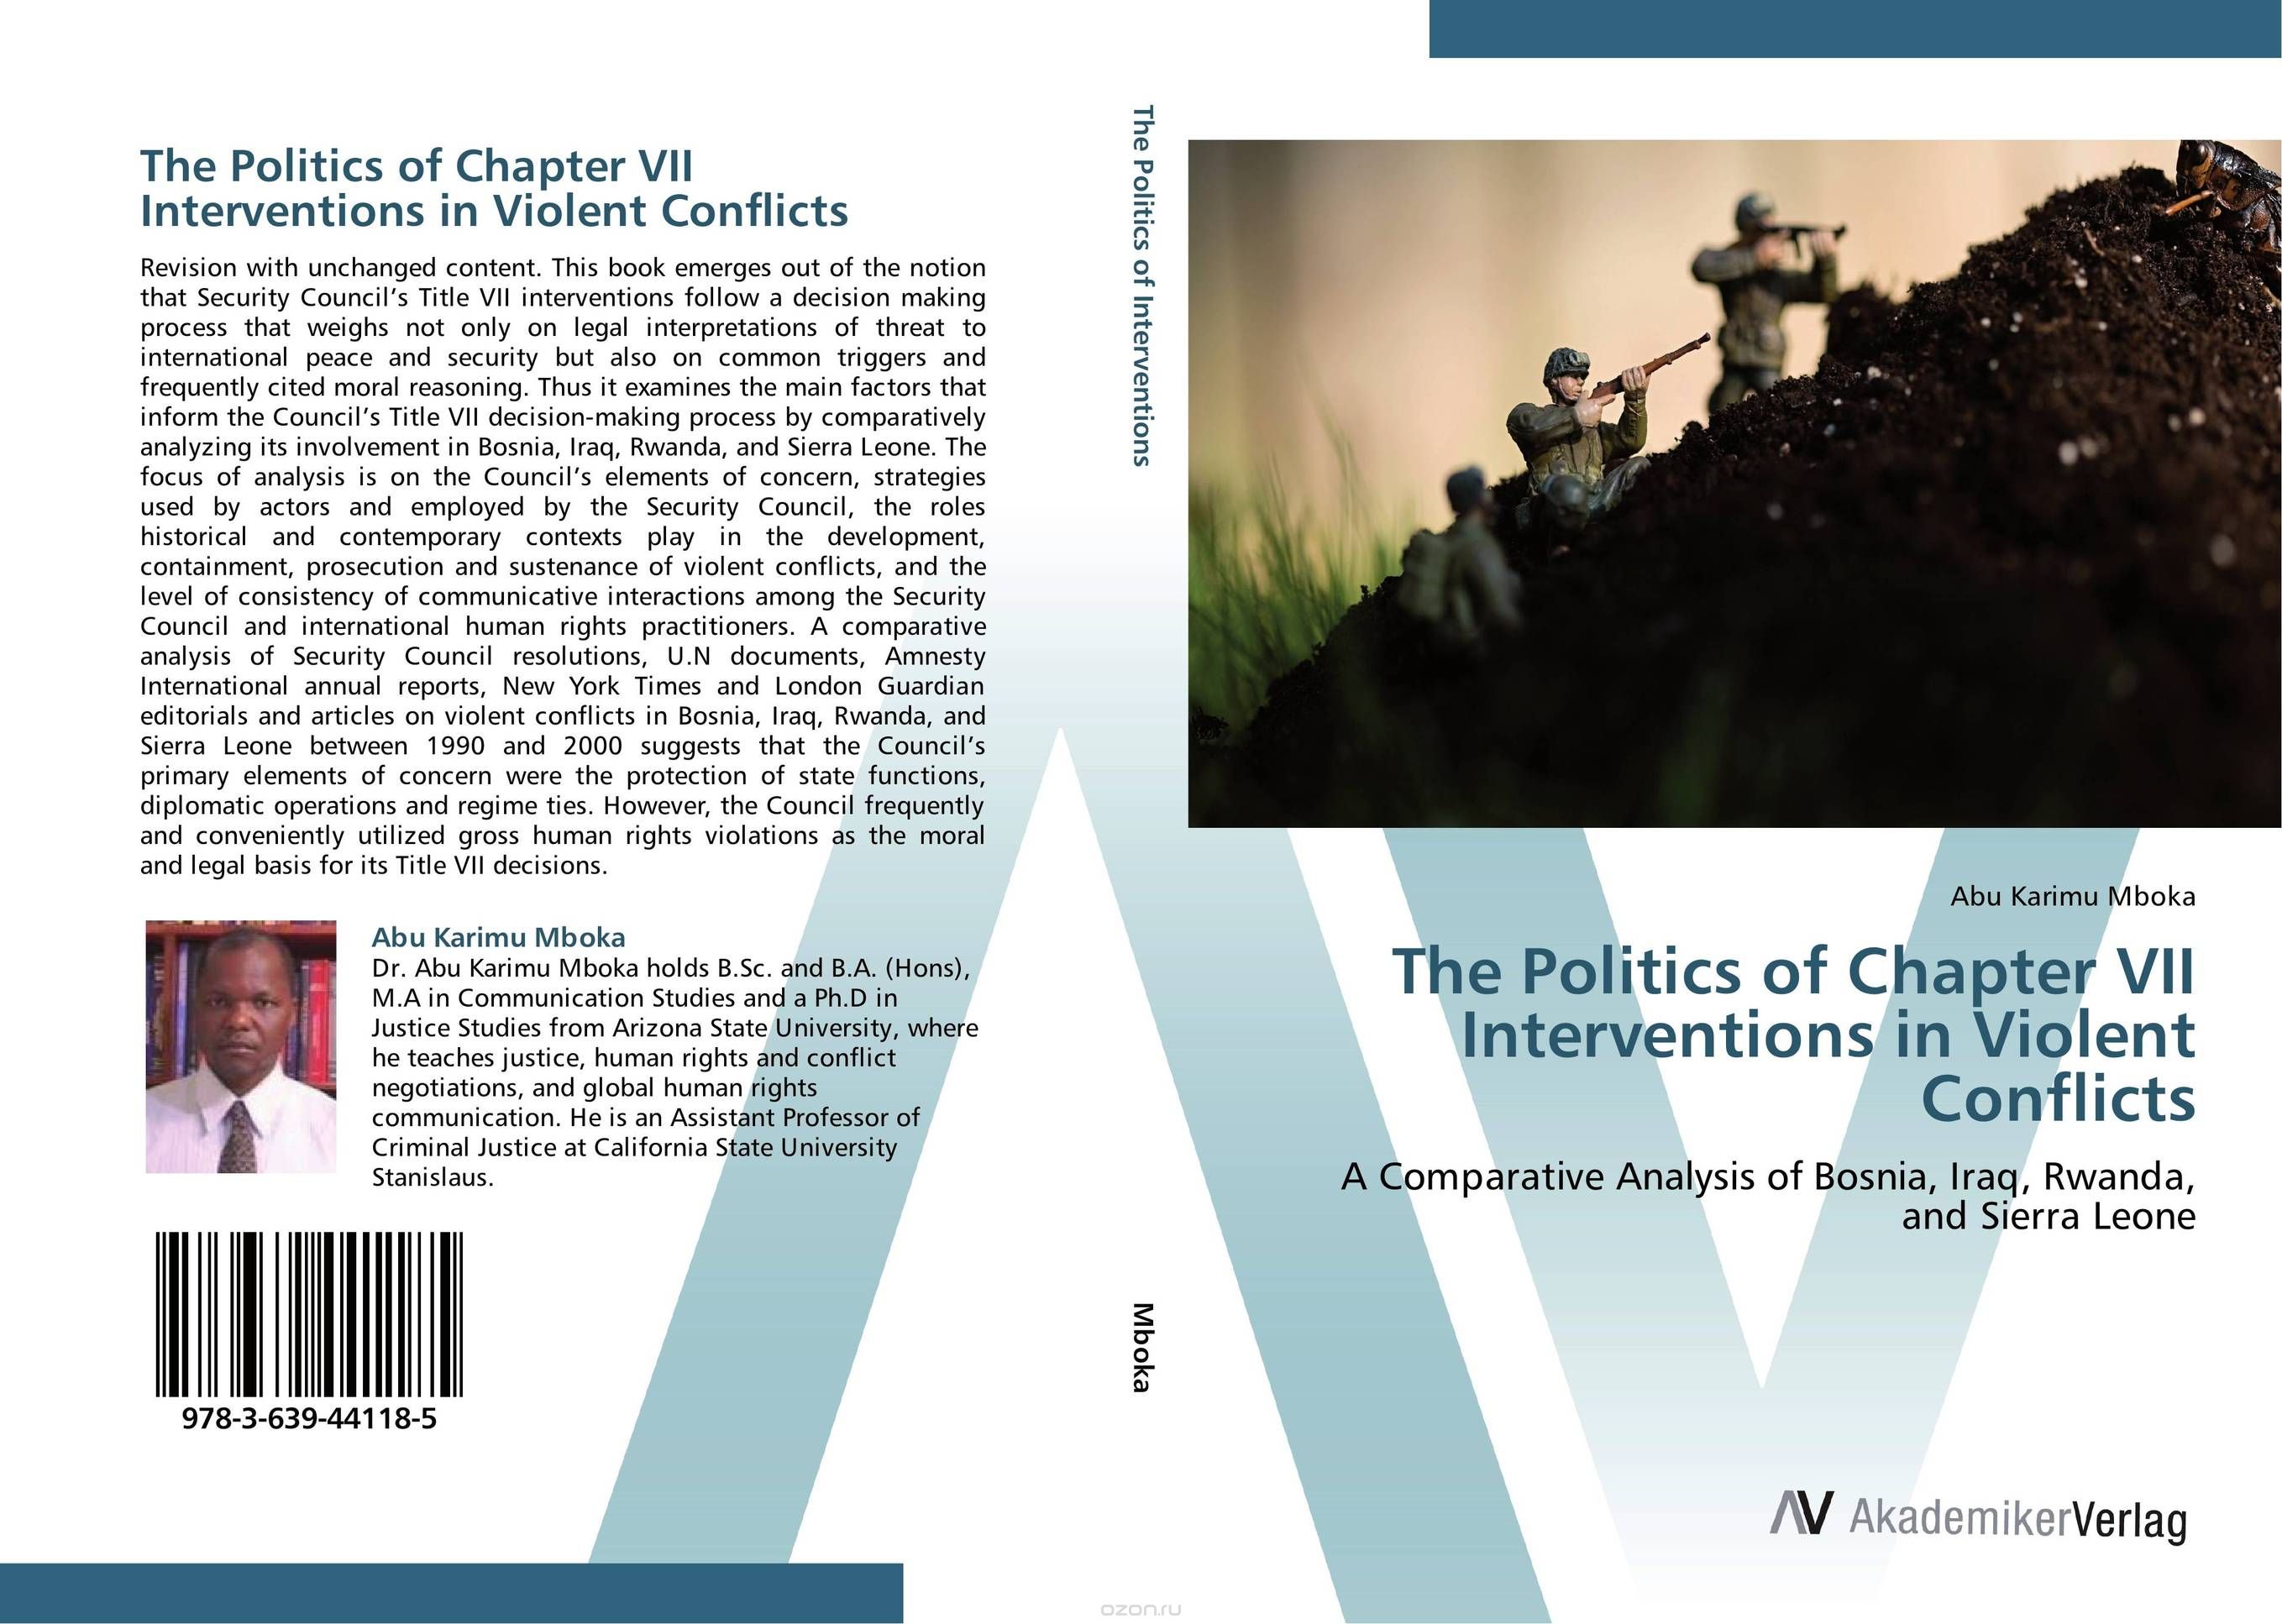 The Politics of Chapter VII Interventions in Violent Conflicts